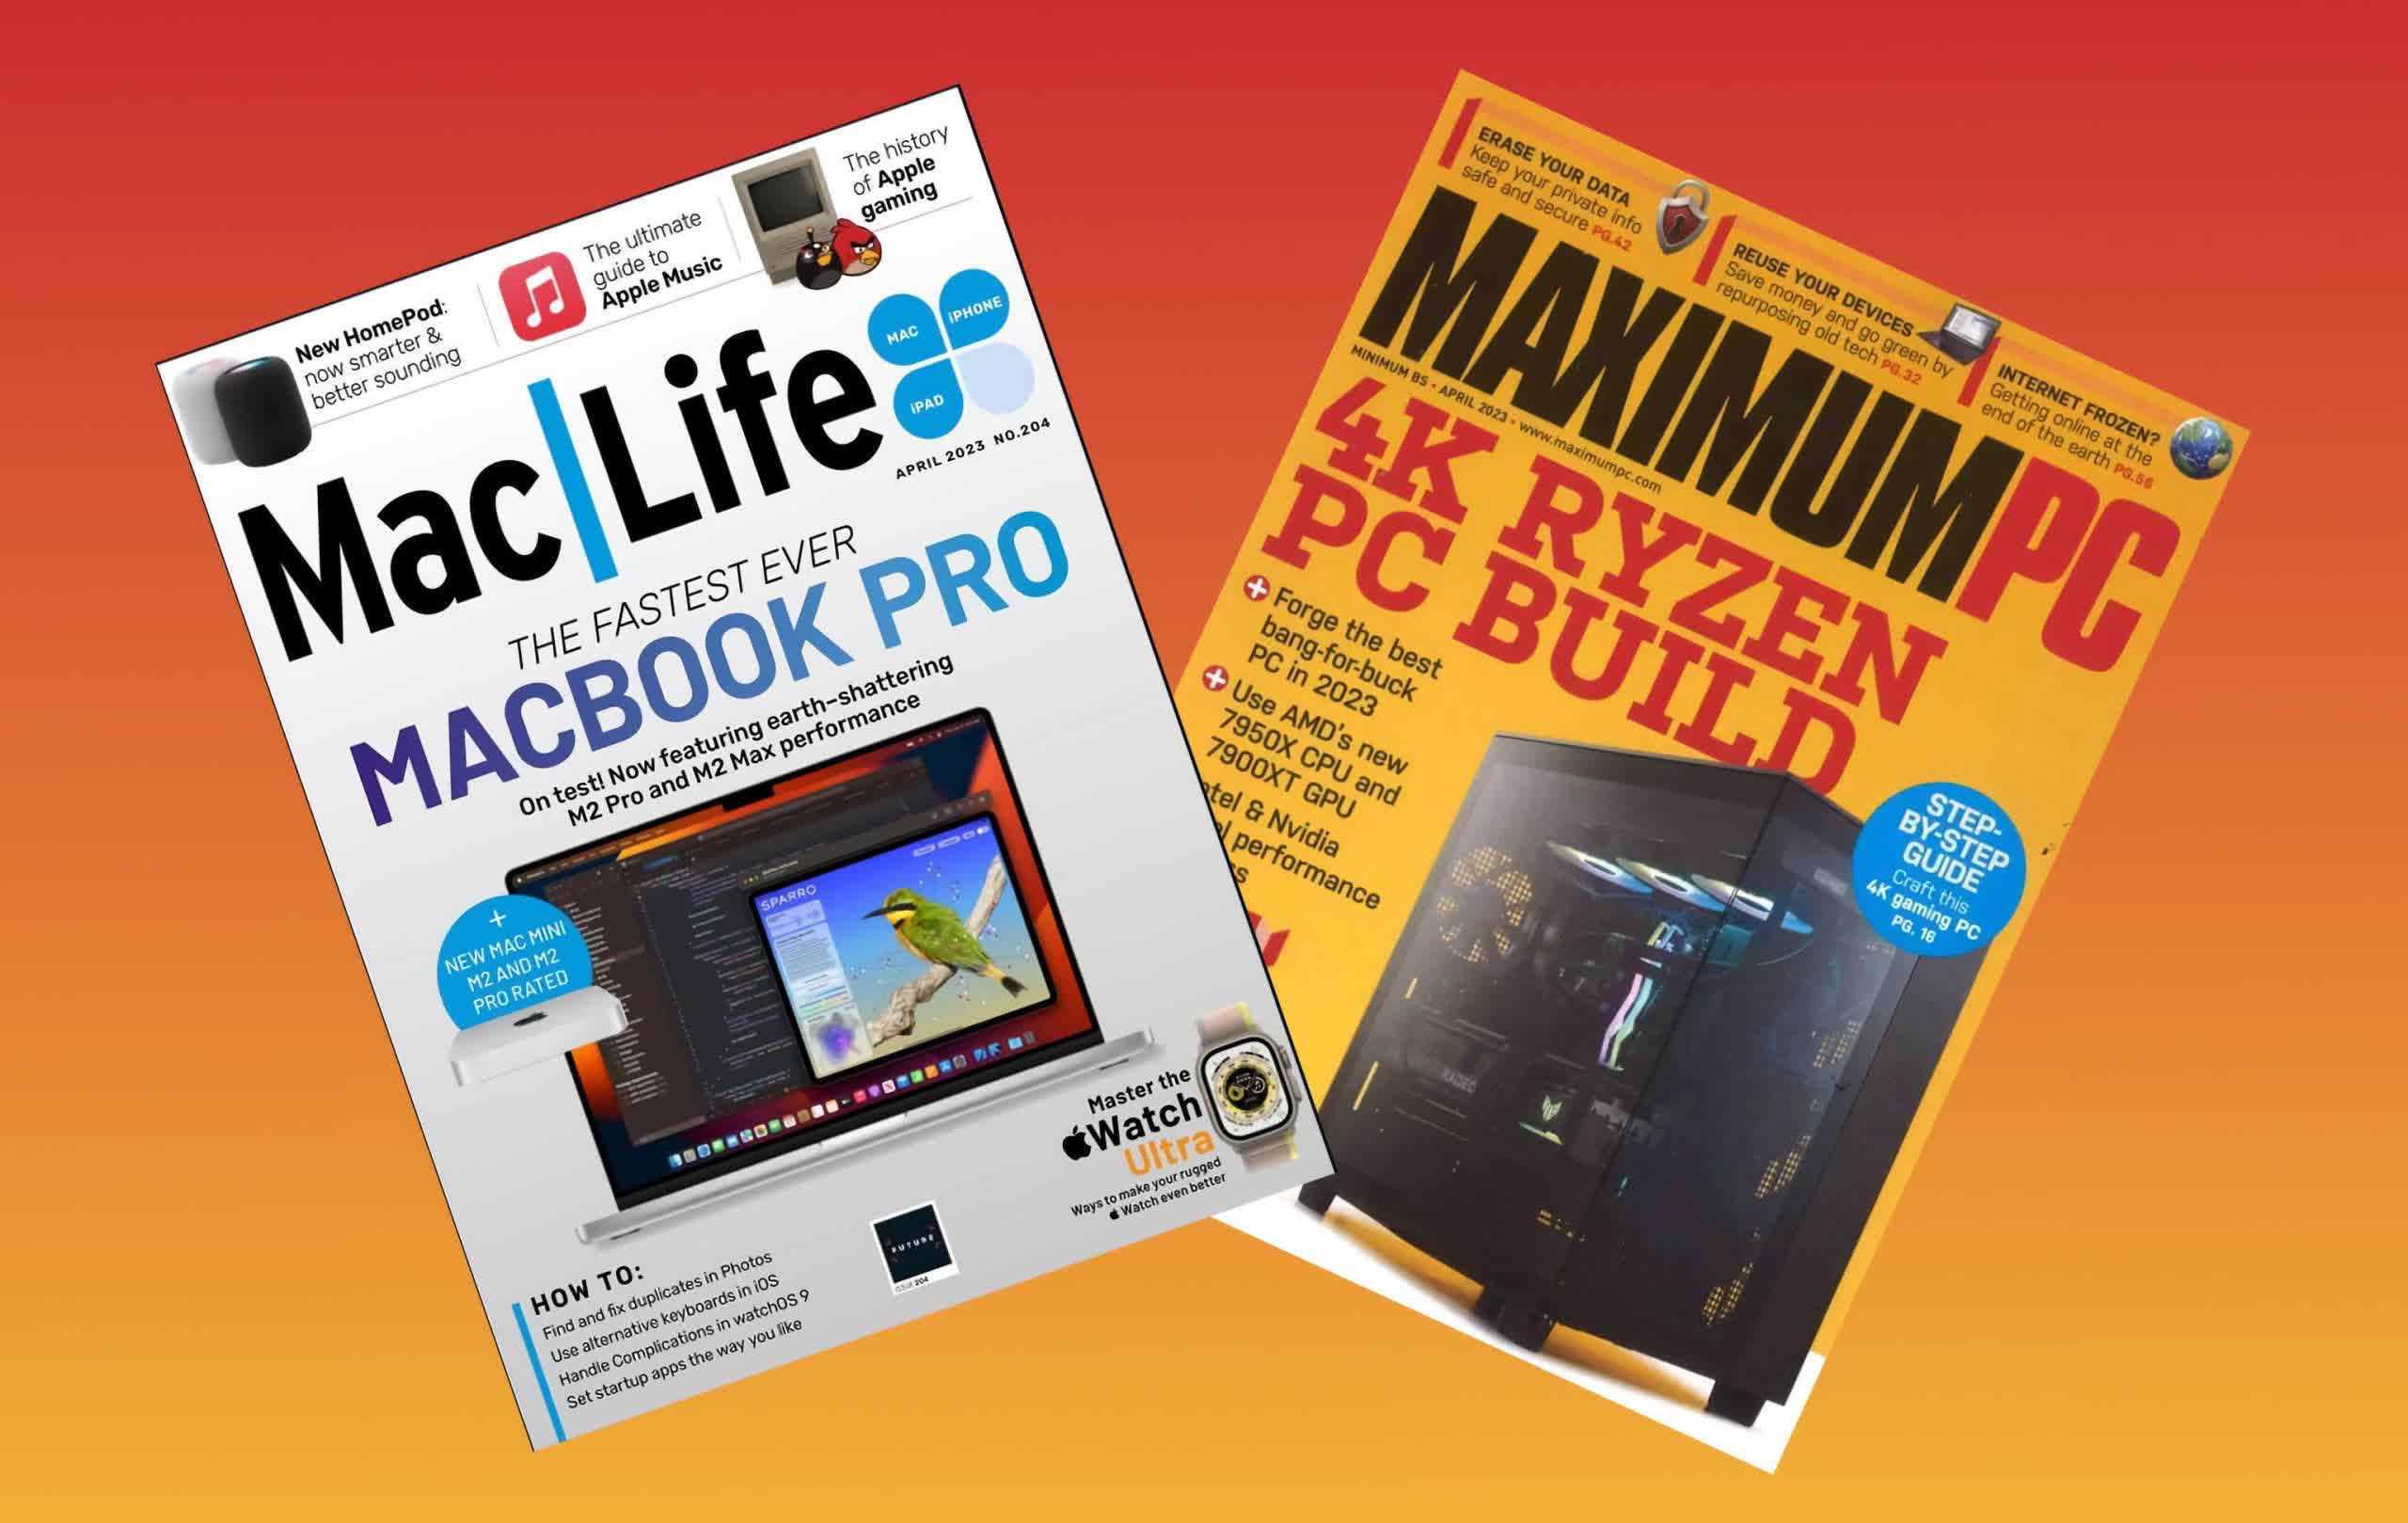 End of an era: The last two print computer magazines just pressed their last issues